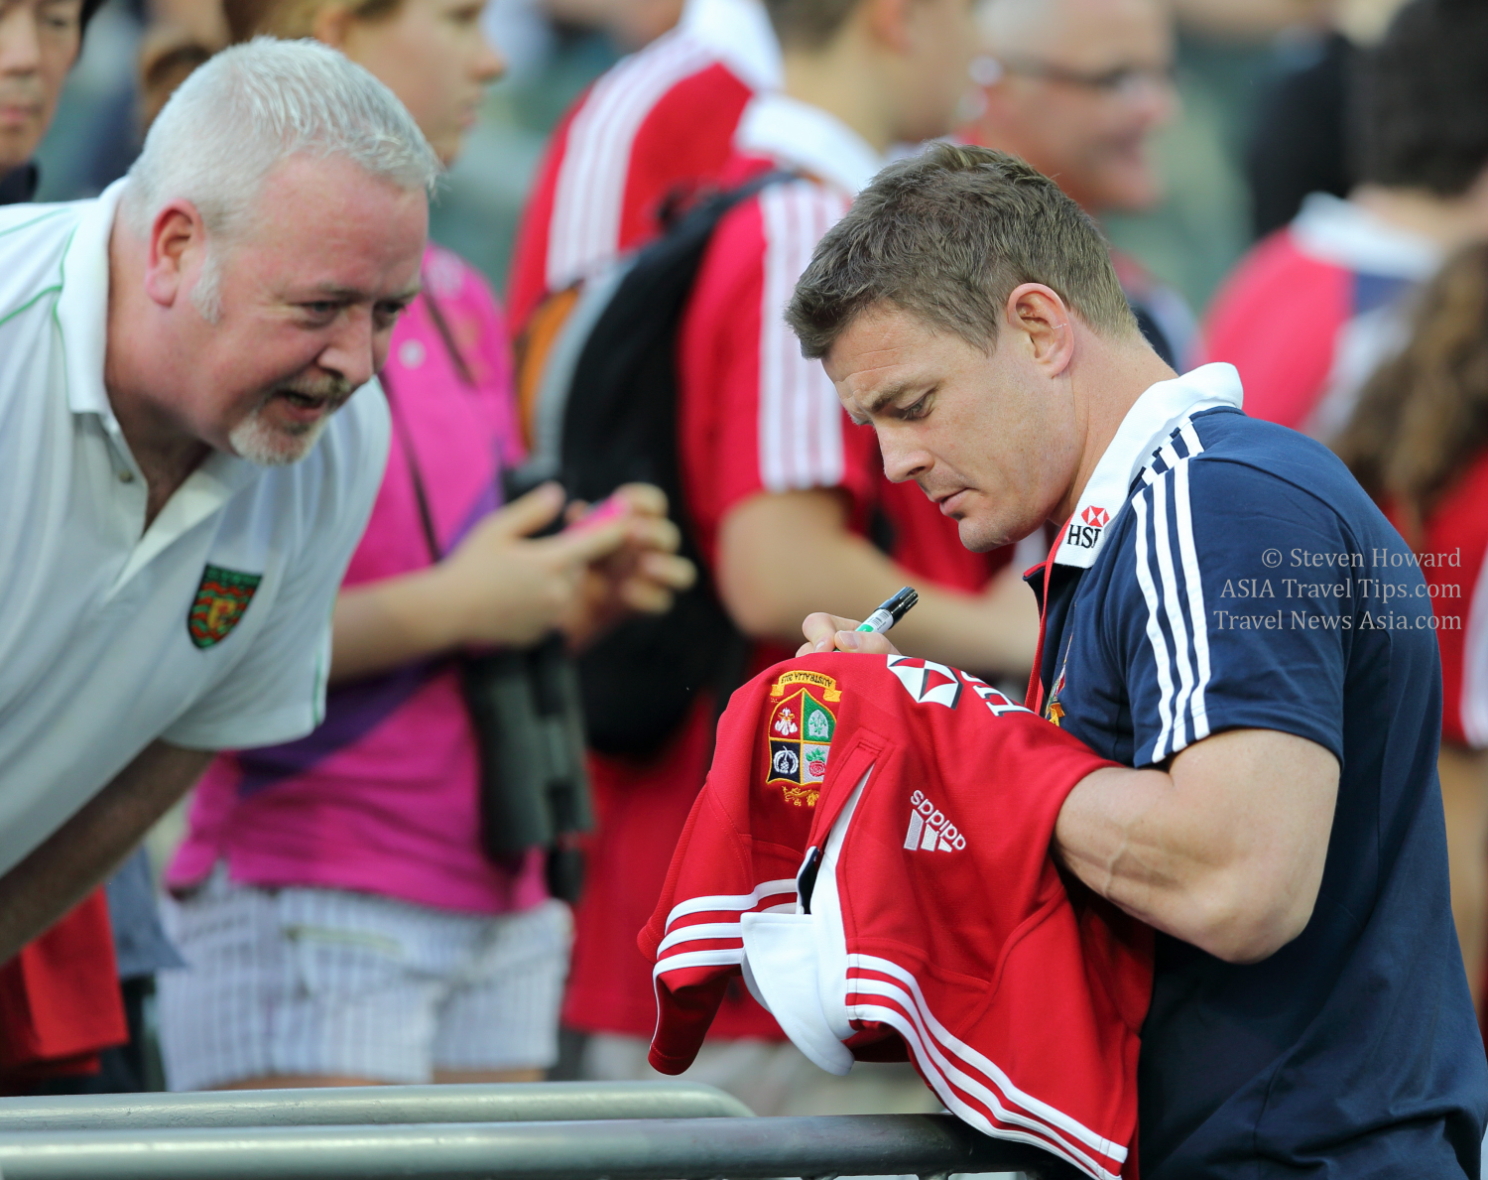 Brian O'Driscoll, an Irish Rugby and Lions Legend, signing a shirt in Hong Kong in 2013. The Lions stopped in Hong Kong on their way to Australia. Picture by Steven Howard of TravelNewsAsia.com Click to enlarge.